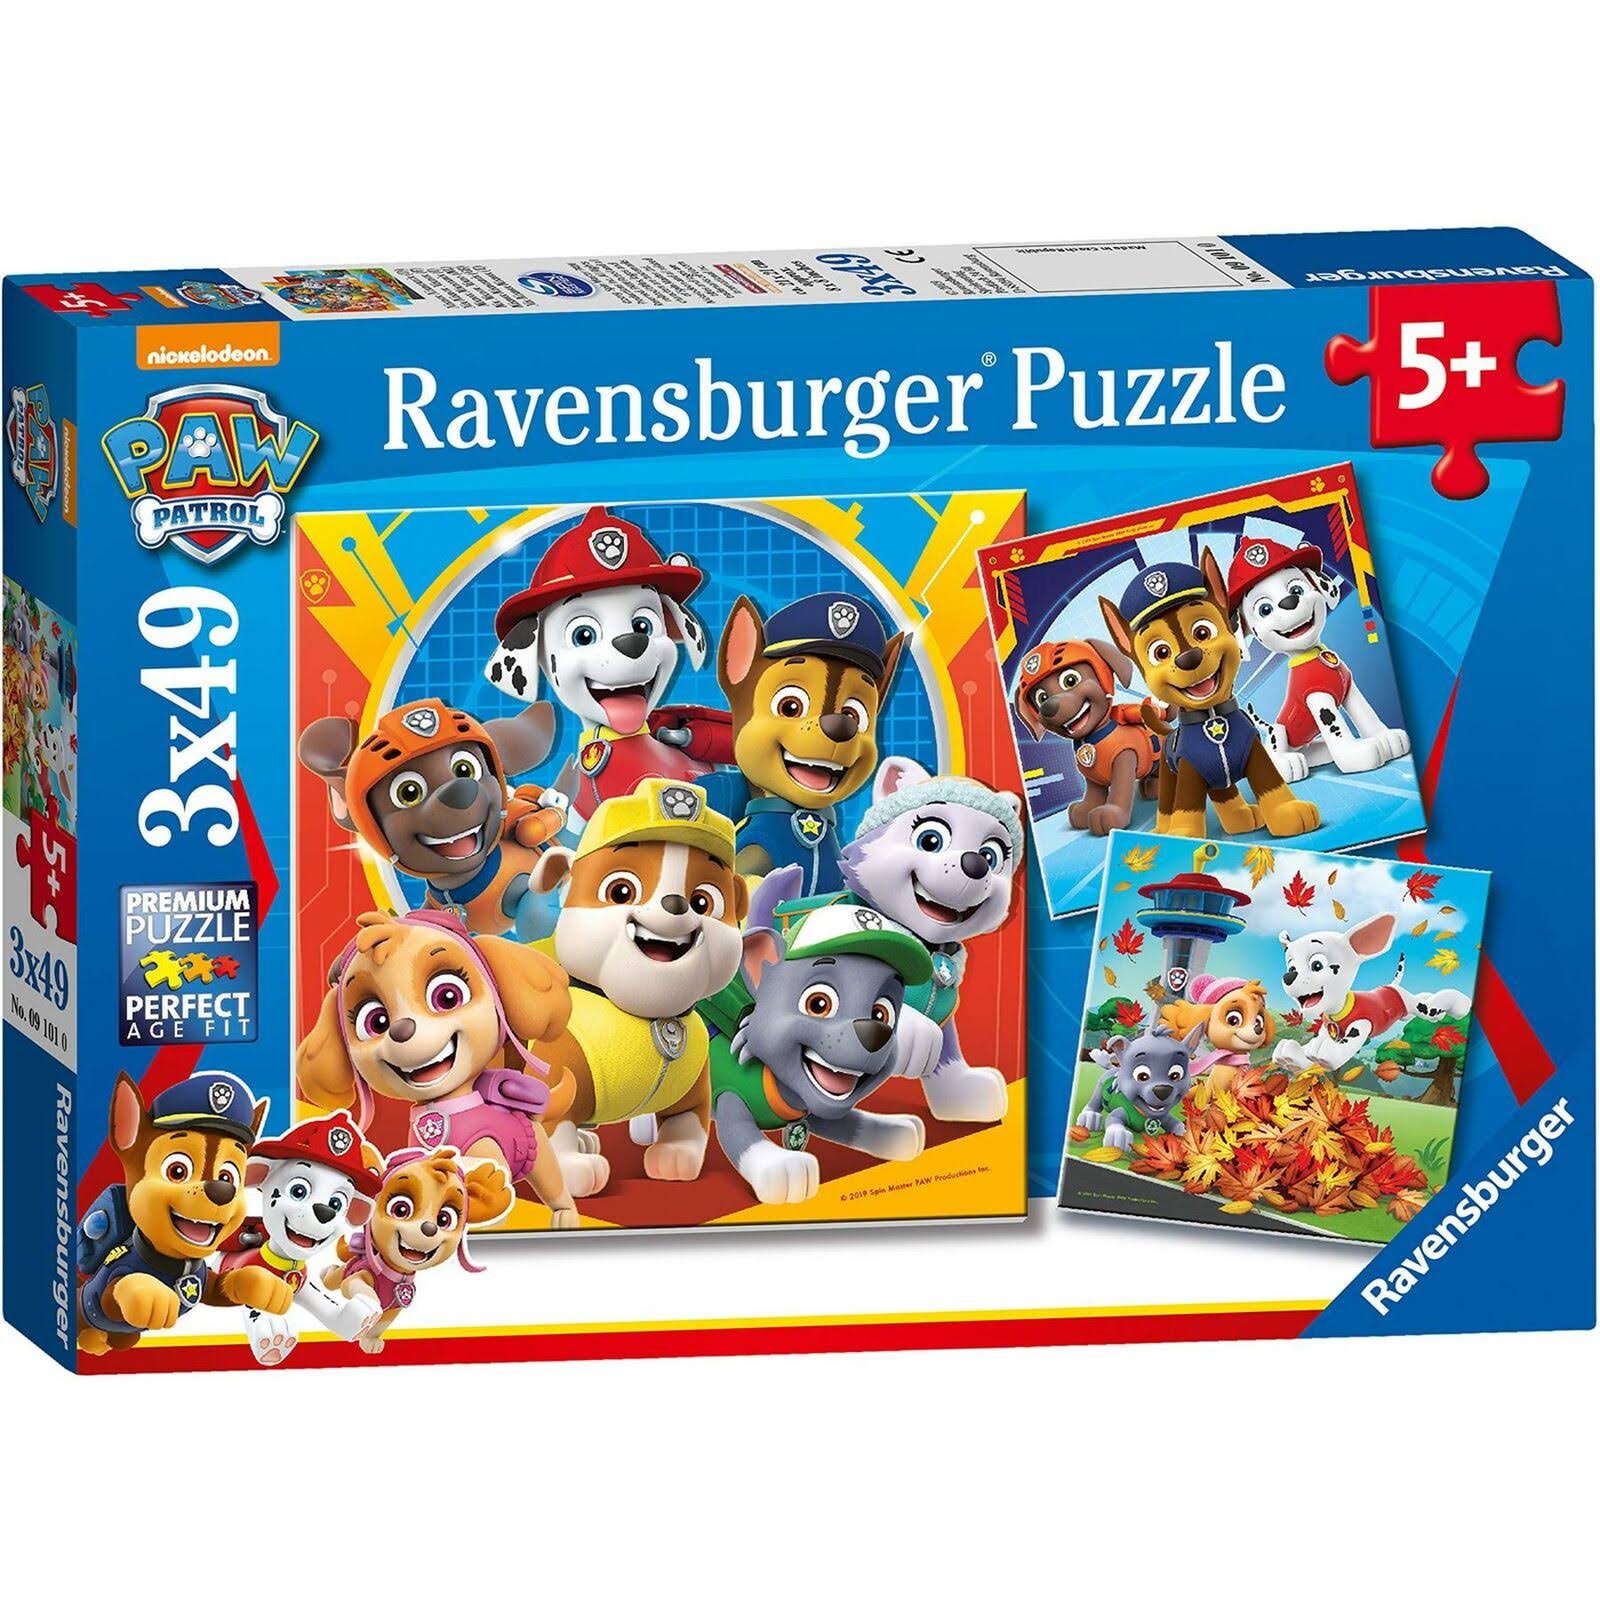 05536 Ravensburger Paw Patrol Shaped Floor Jigsaw Puzzle Childrens Age 3 Years 